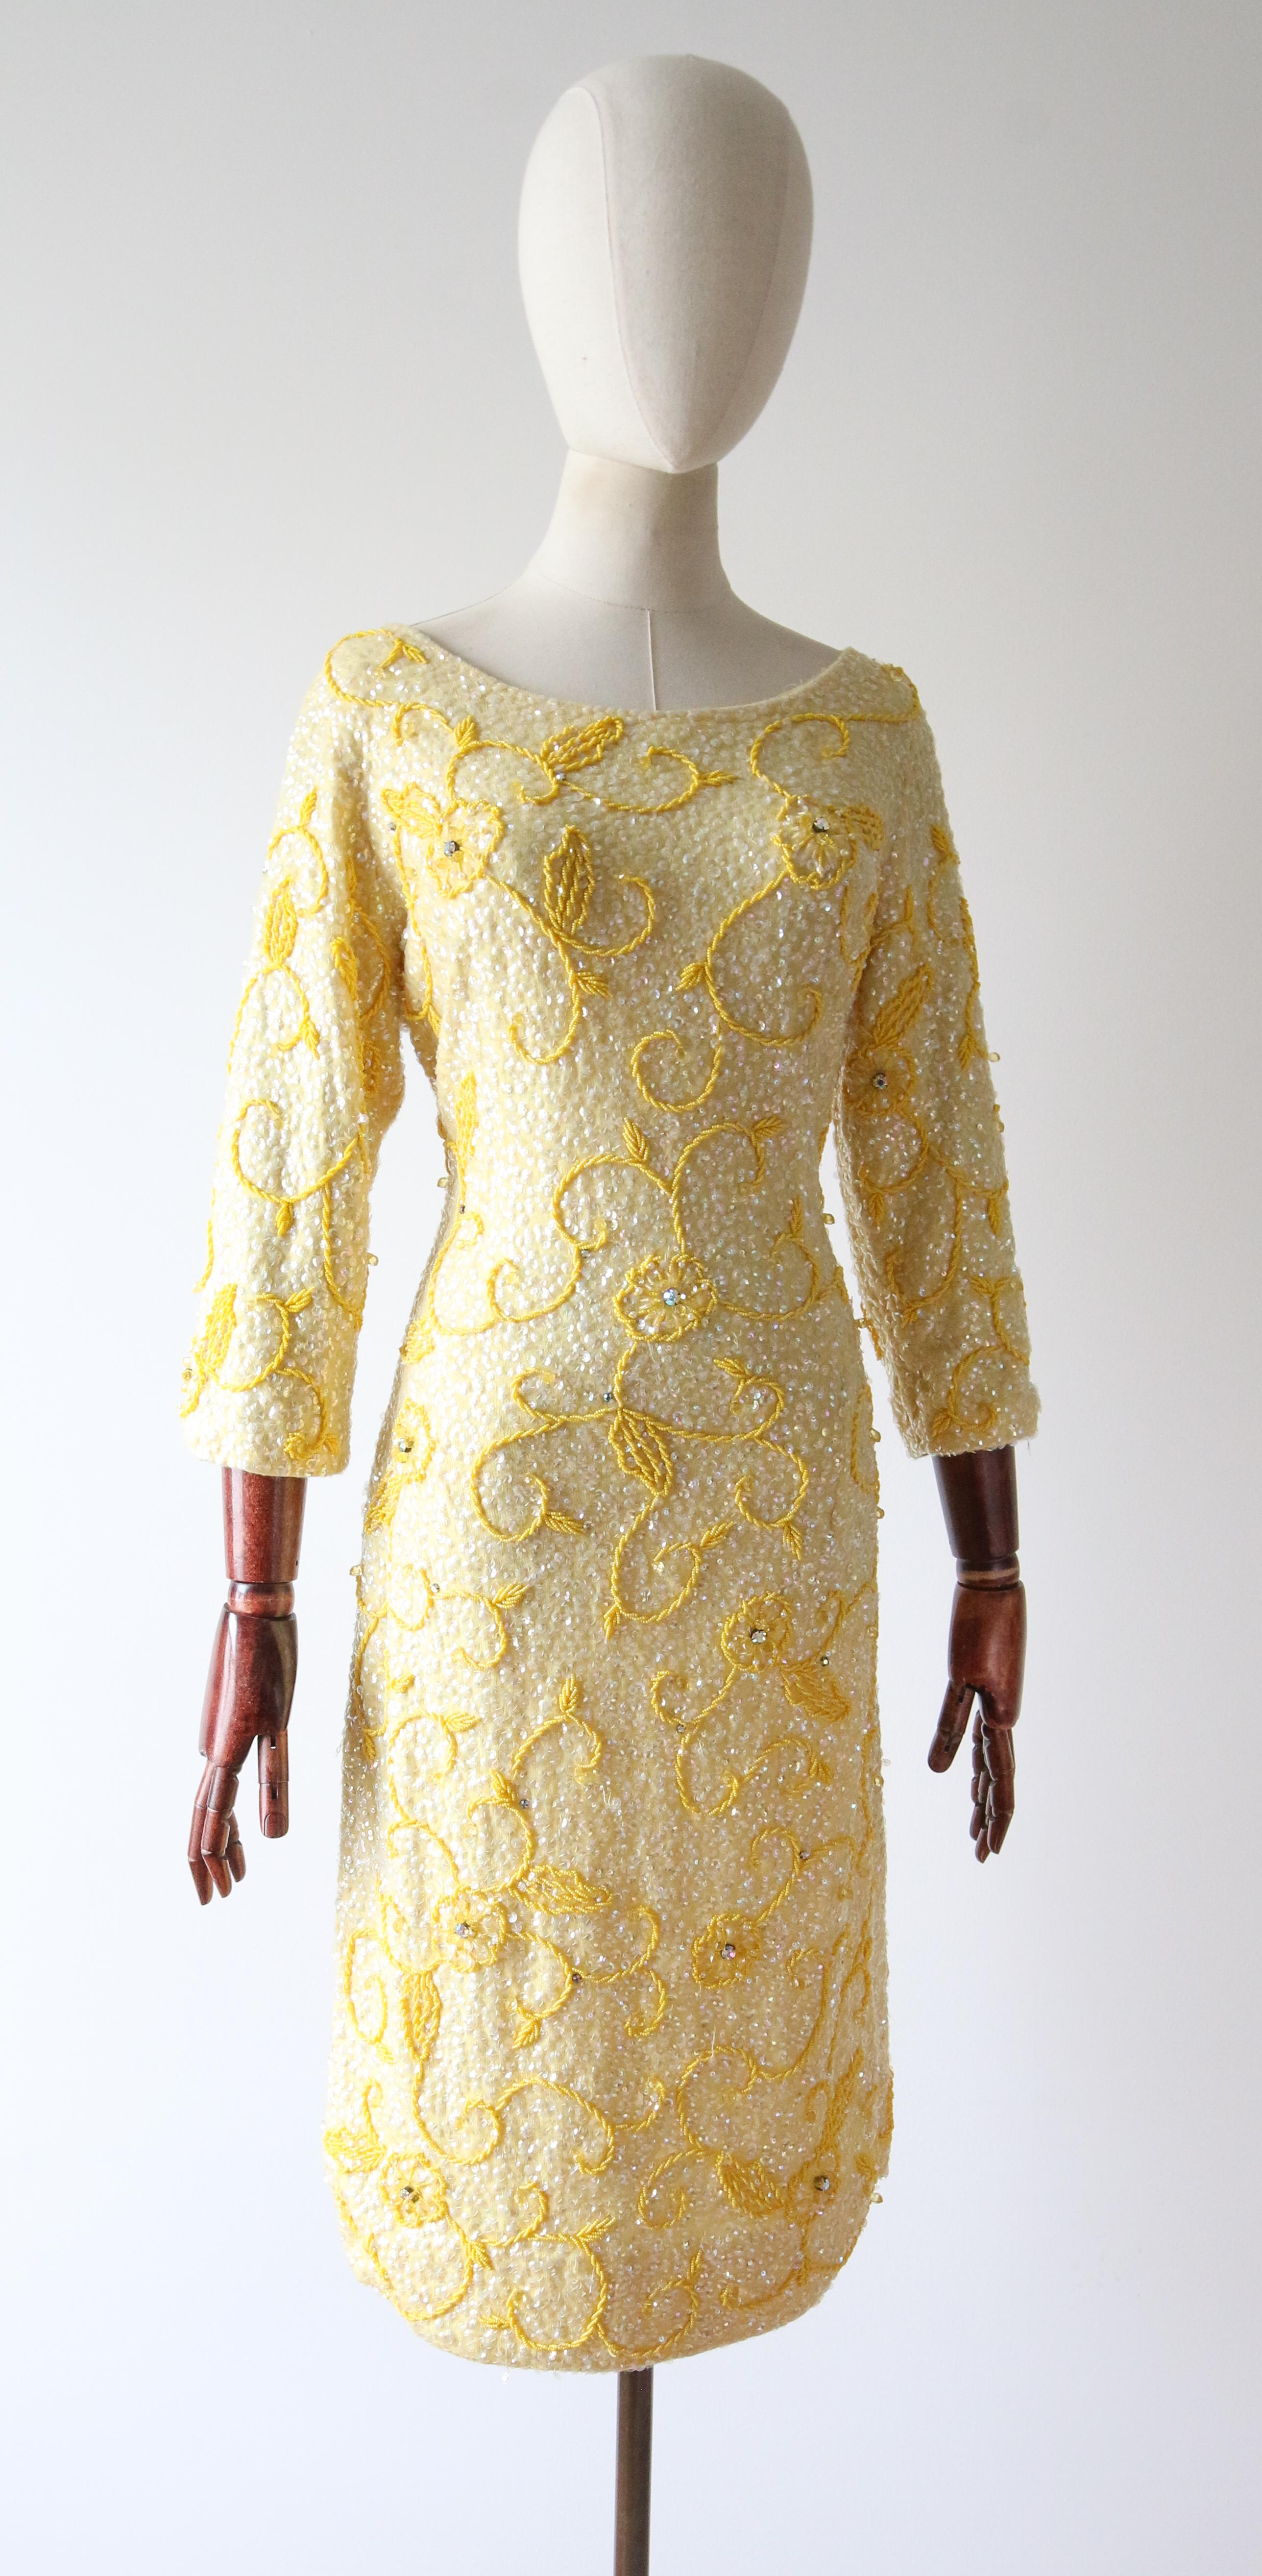 Women's or Men's Vintage 1960's yellow sequin beaded cocktail dress wiggle dress UK 12 US 8  For Sale